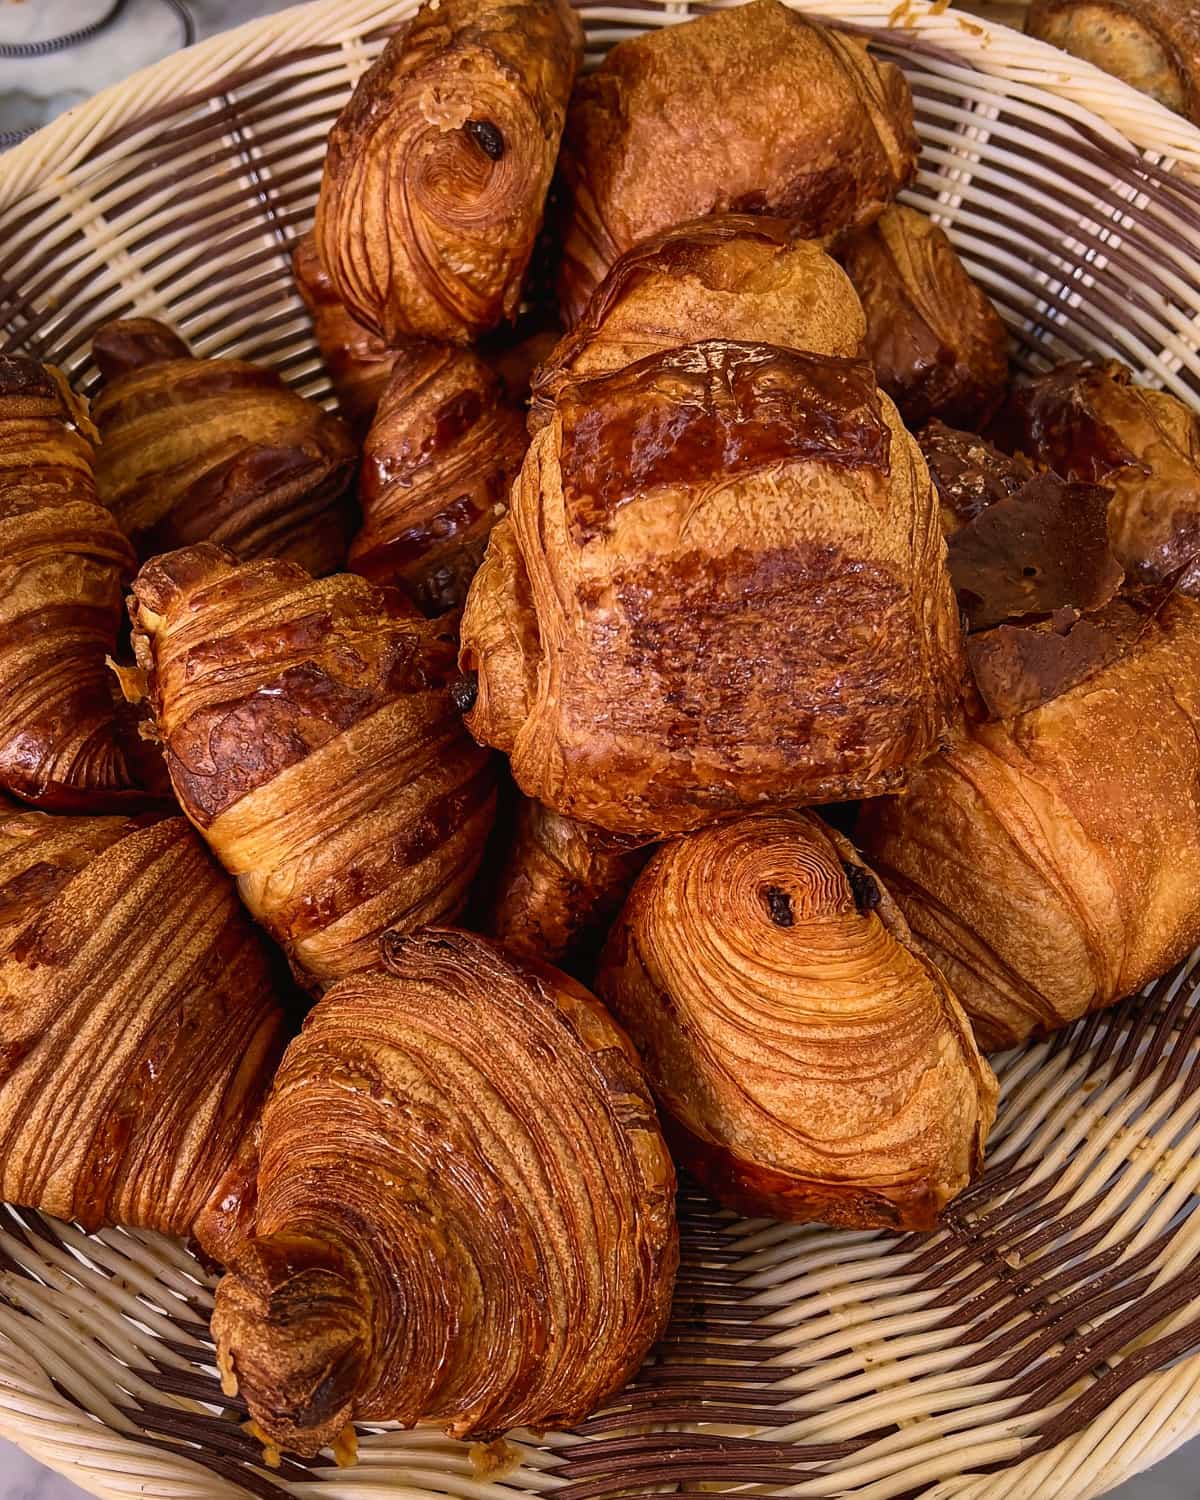 croissants on a basket in a bakery